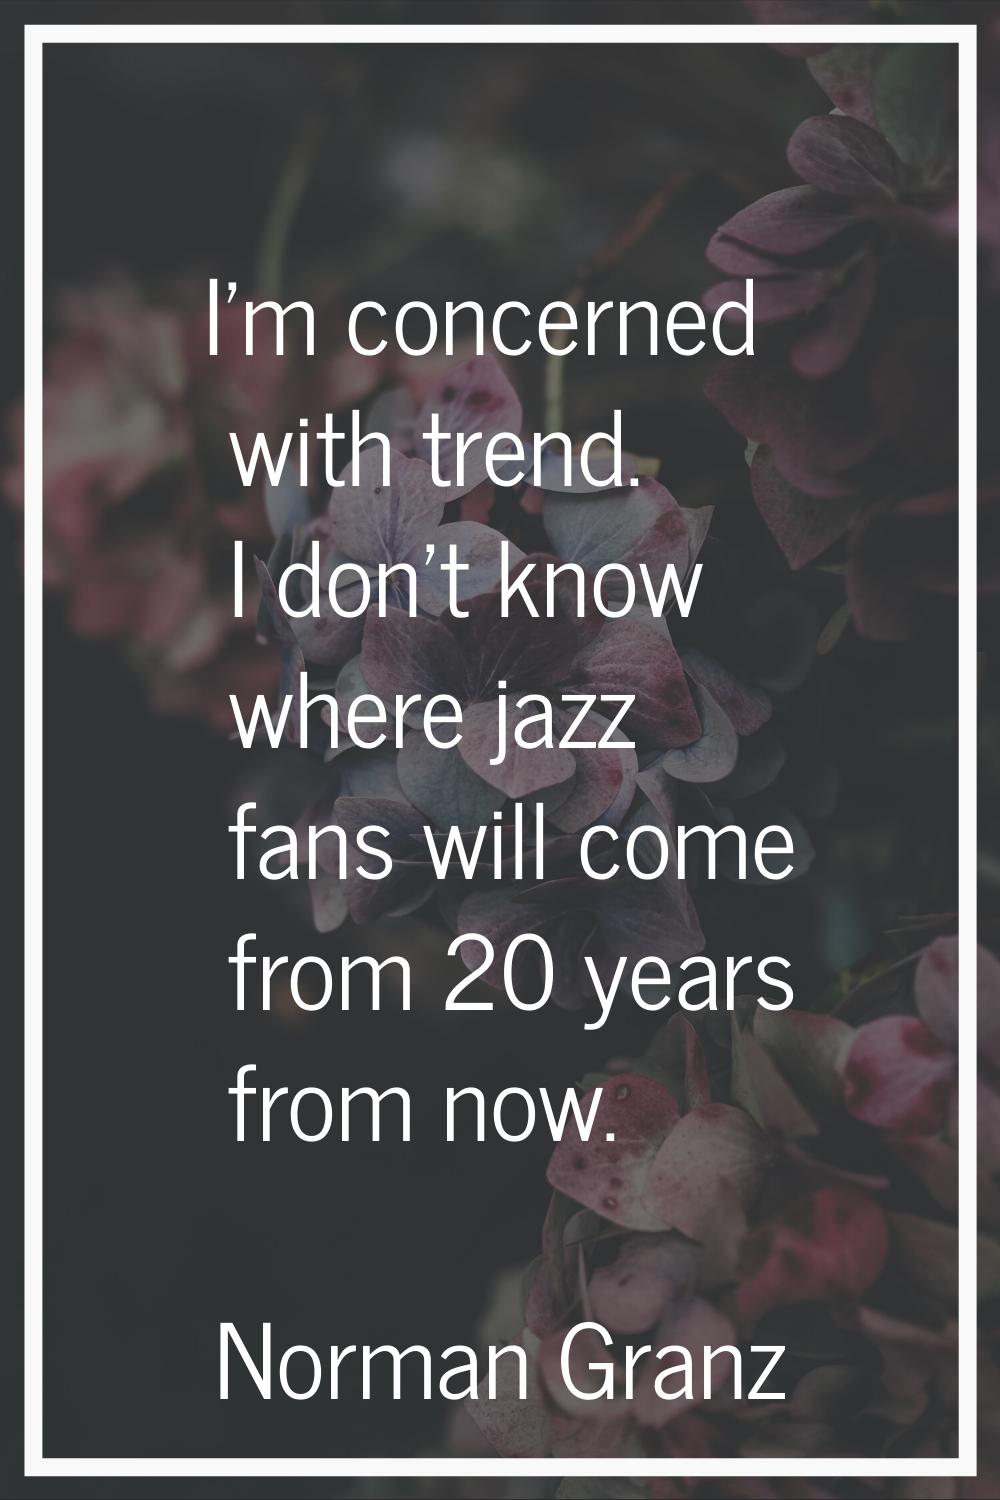 I'm concerned with trend. I don't know where jazz fans will come from 20 years from now.